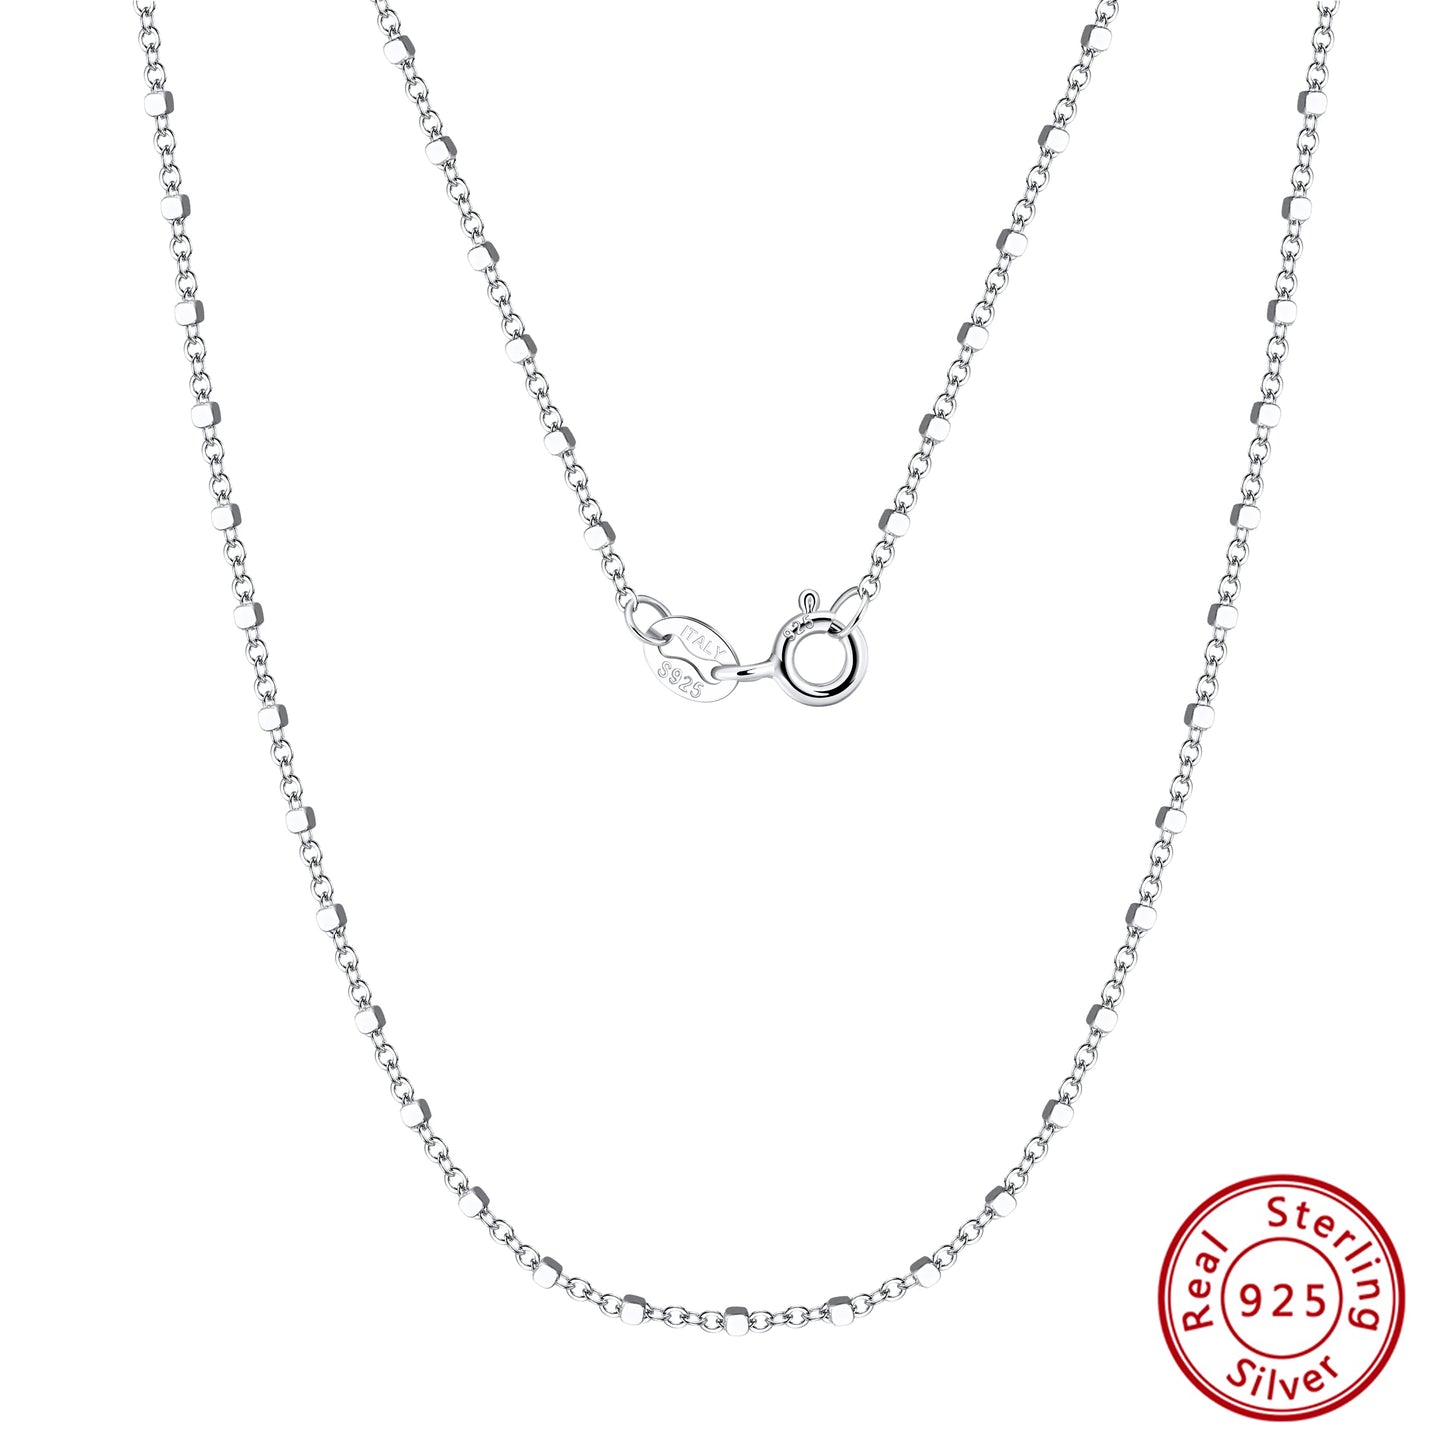 plain sterling silver chain necklace online delivery for ladies, women necklace rhodium plated